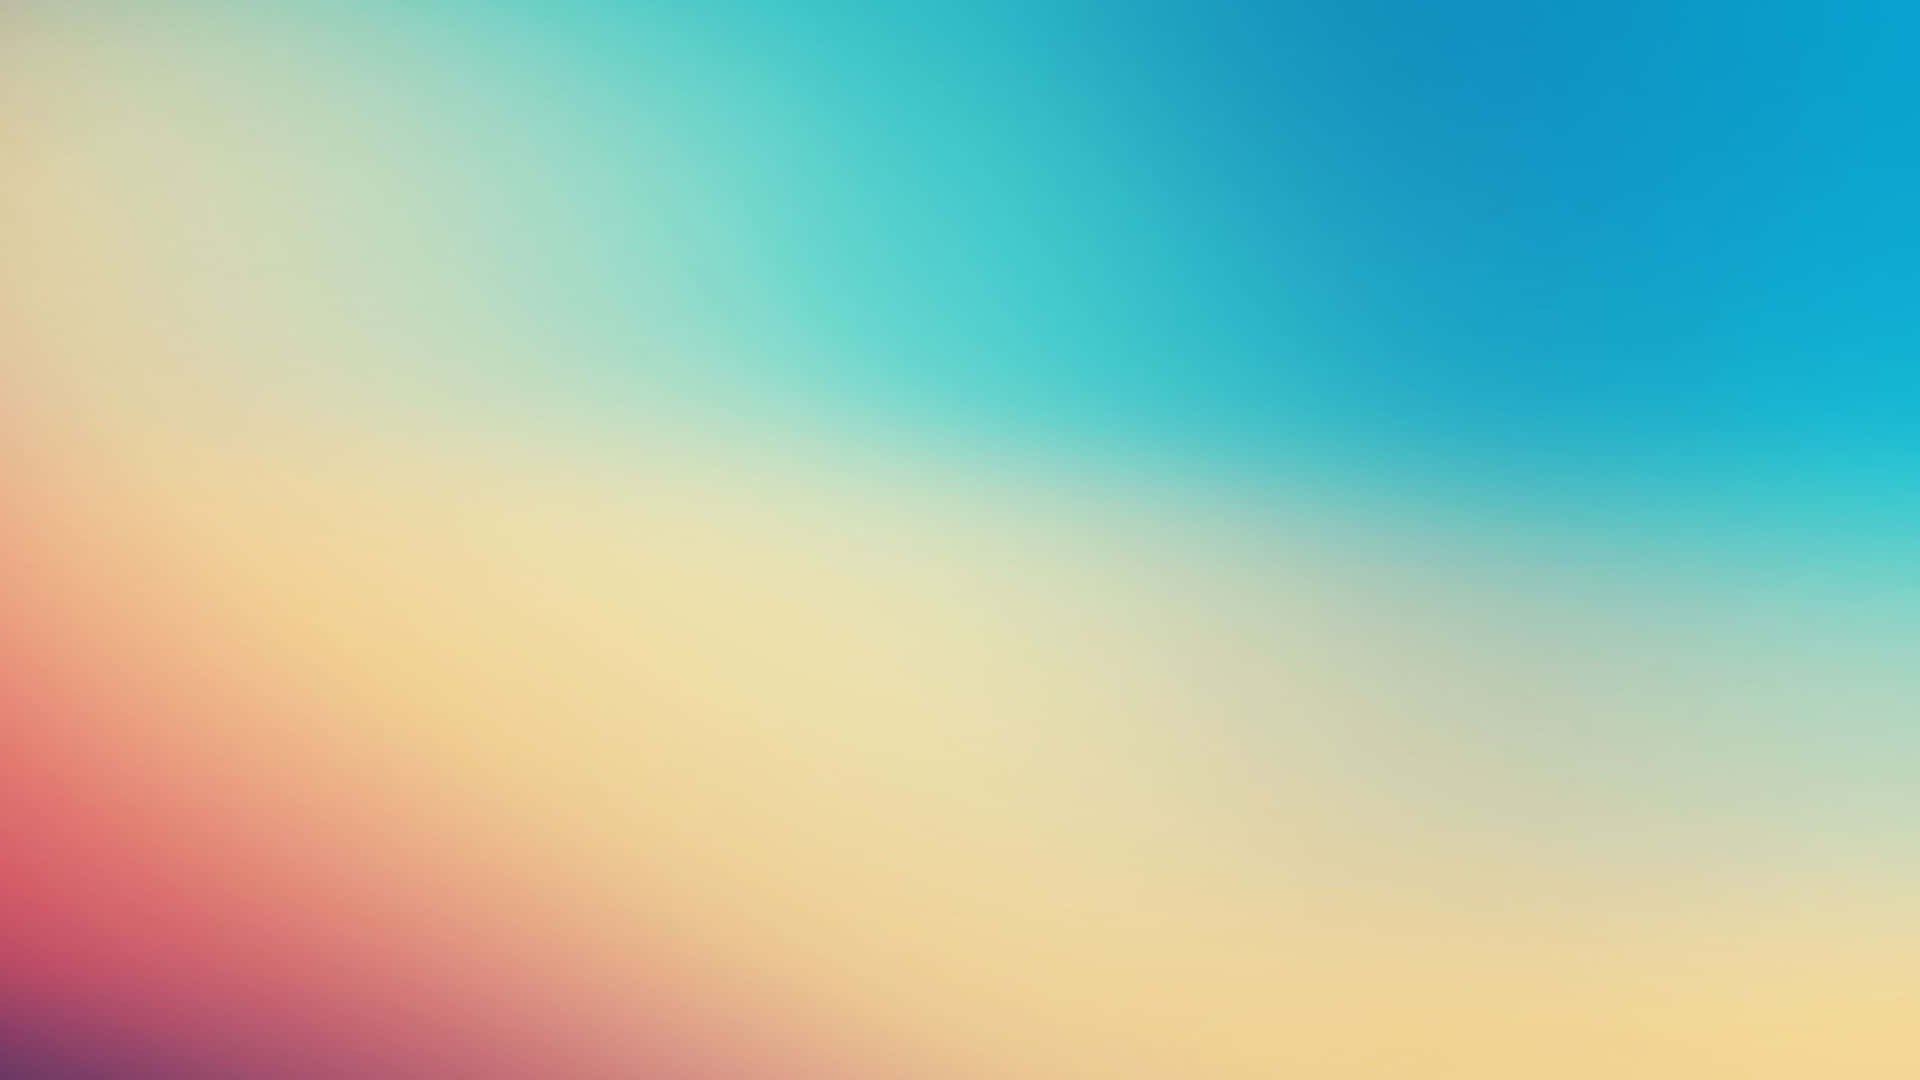 Bright Background Of Gradient Colors